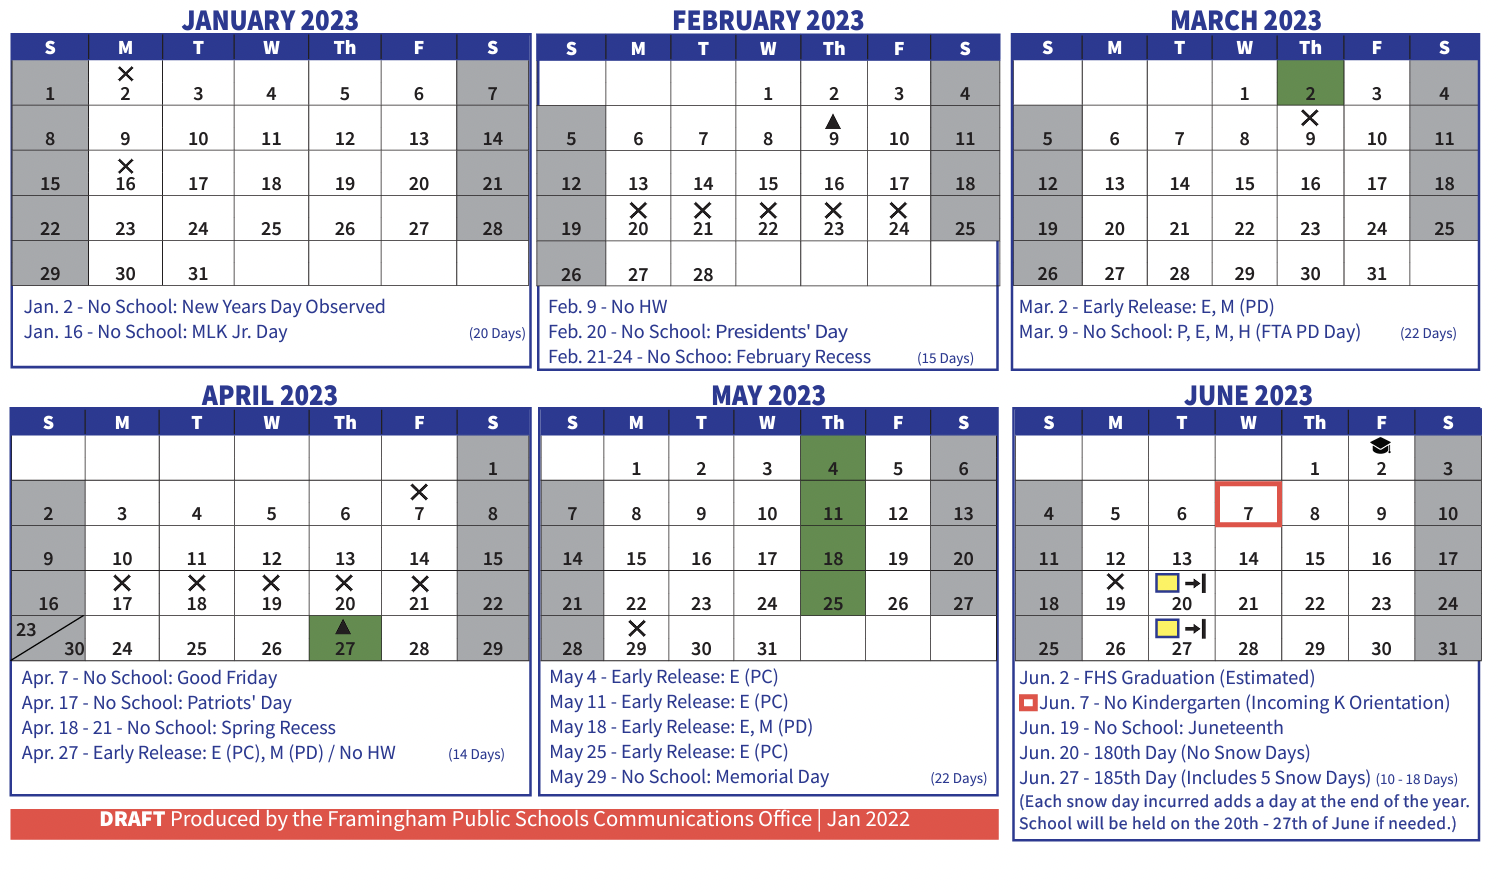 First Look at the Proposed Framingham 2022-23 School Calendar